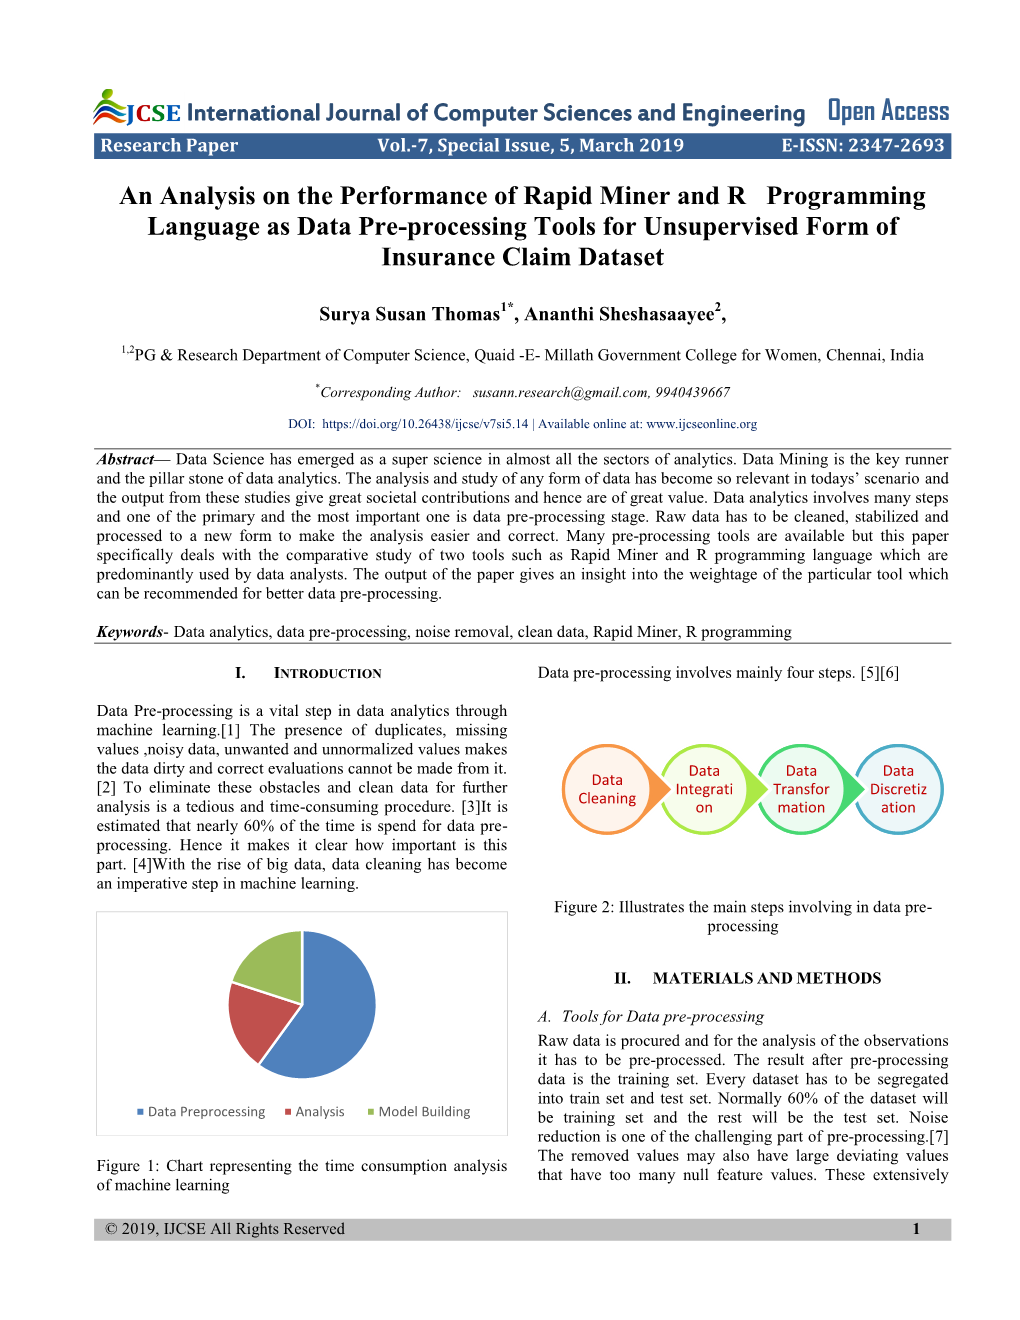 An Analysis on the Performance of Rapid Miner and R Programming Language As Data Pre-Processing Tools for Unsupervised Form of Insurance Claim Dataset